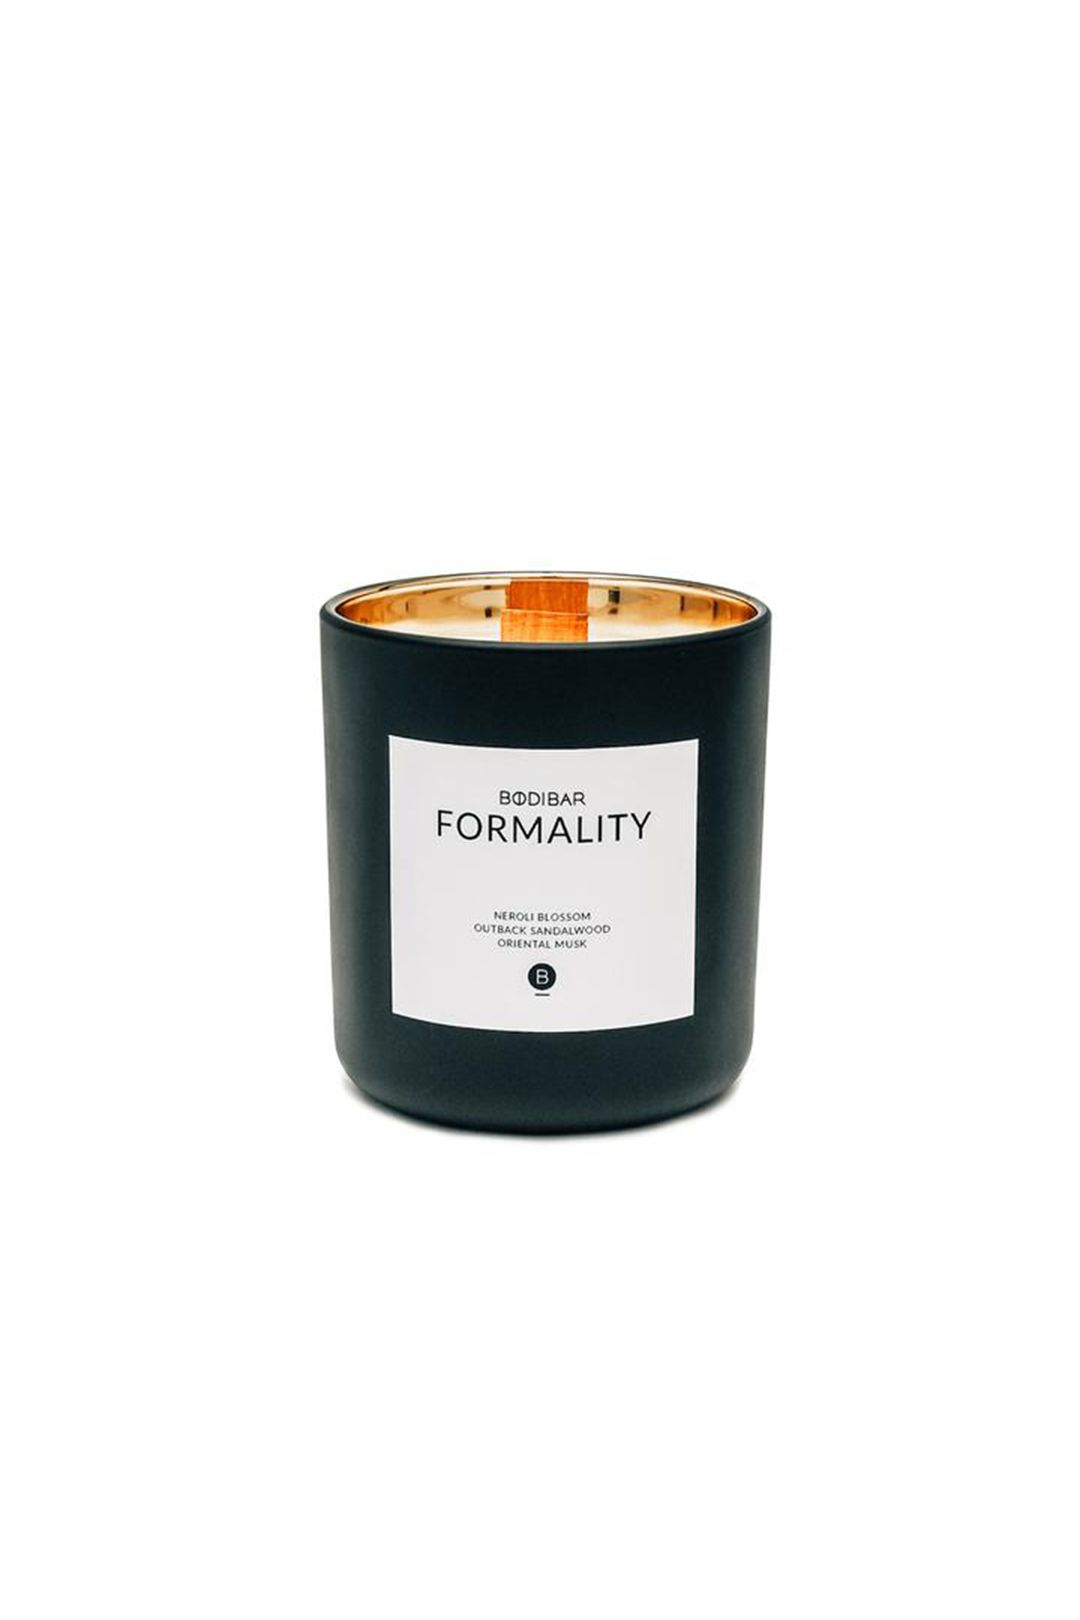 bodibar-formality-black-luxe-candle